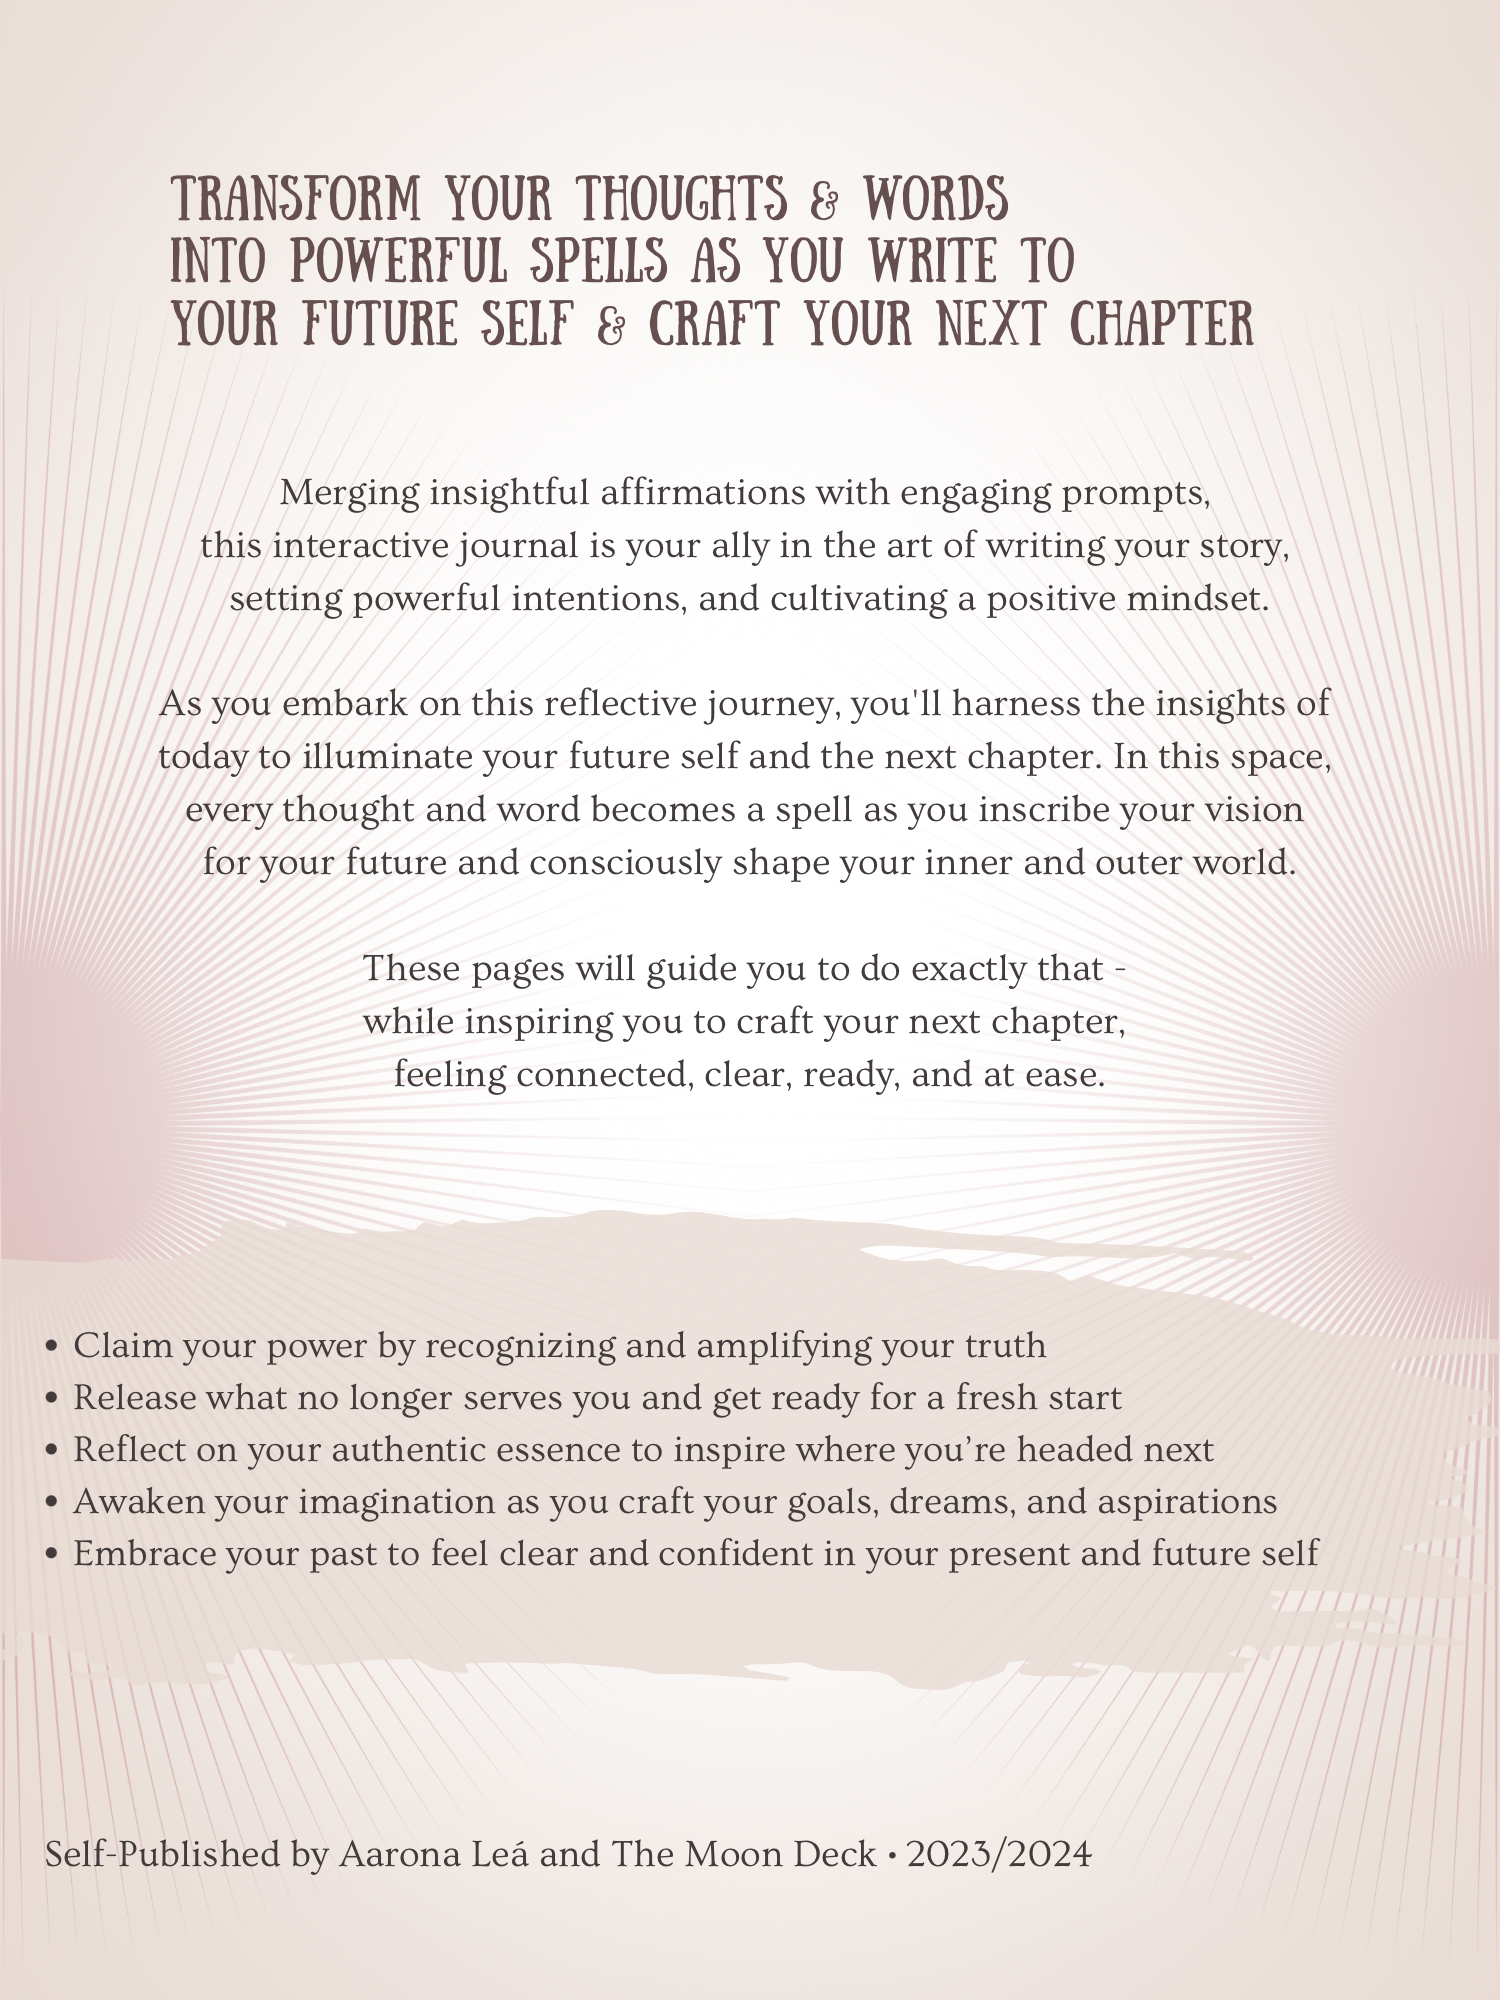 The Next Chapter: Craft Your Future Self